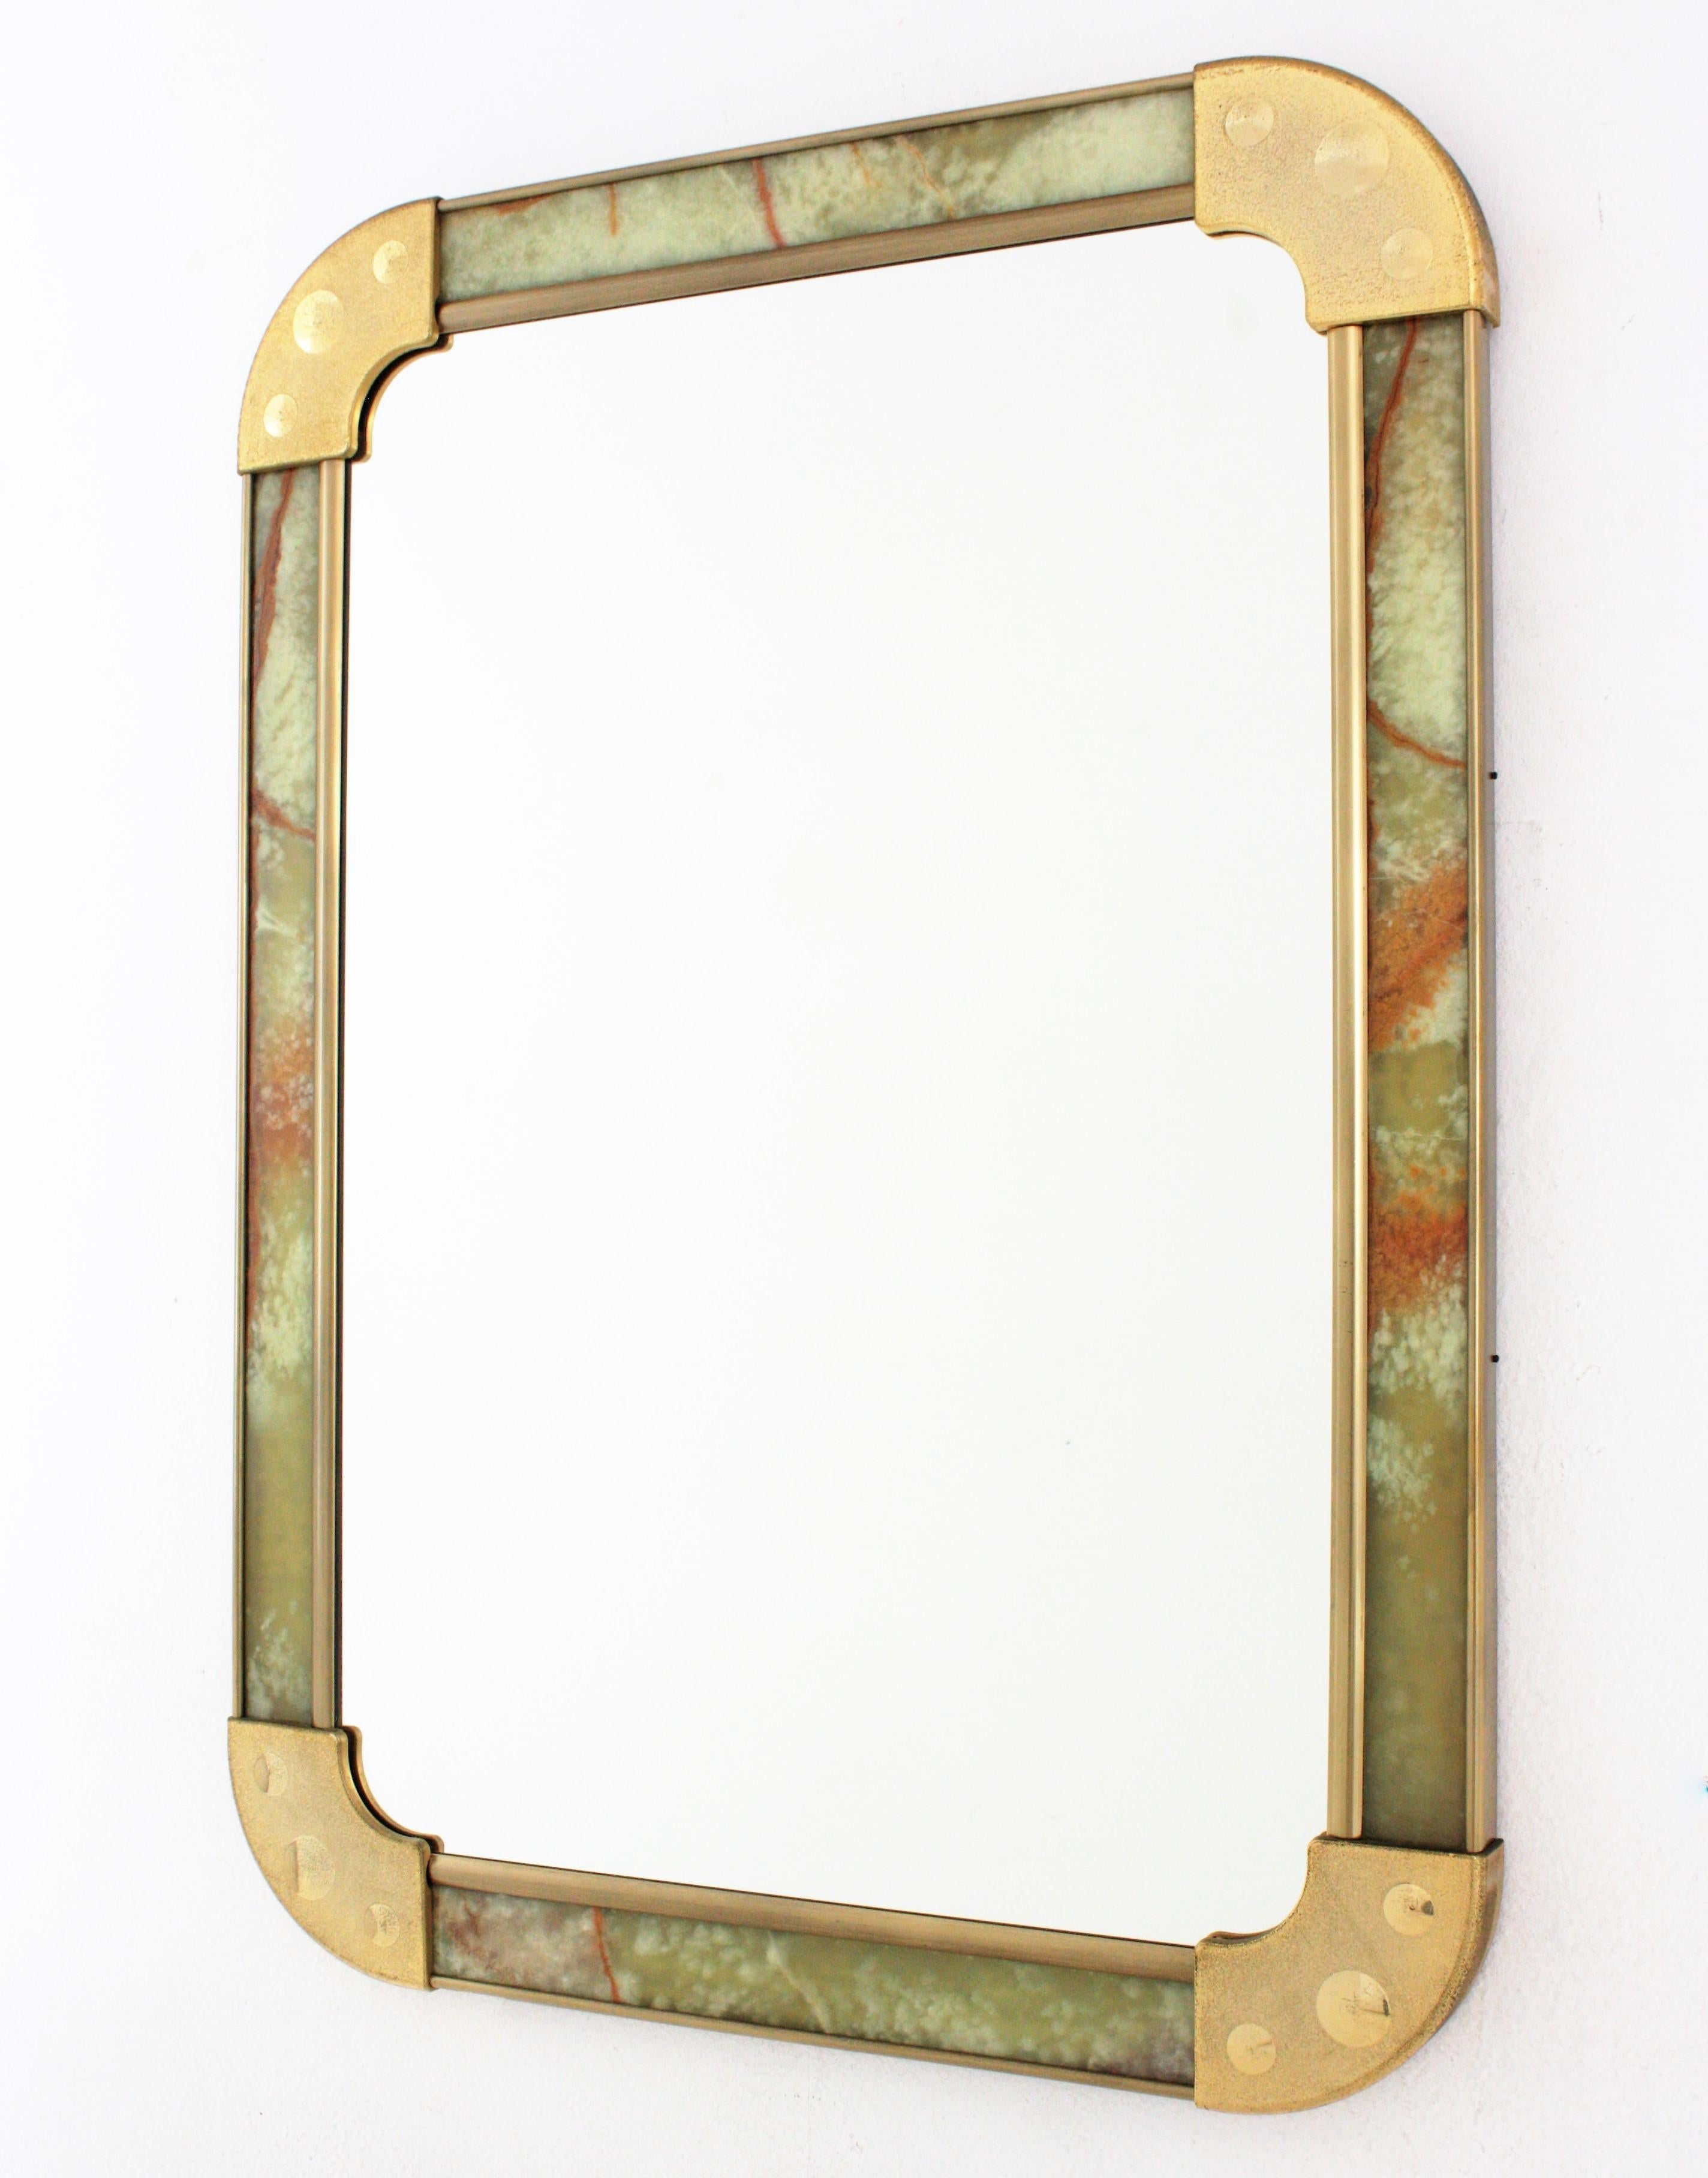 Spanish Midcentury Rectangular Mirror in Onyx and Brass For Sale 5